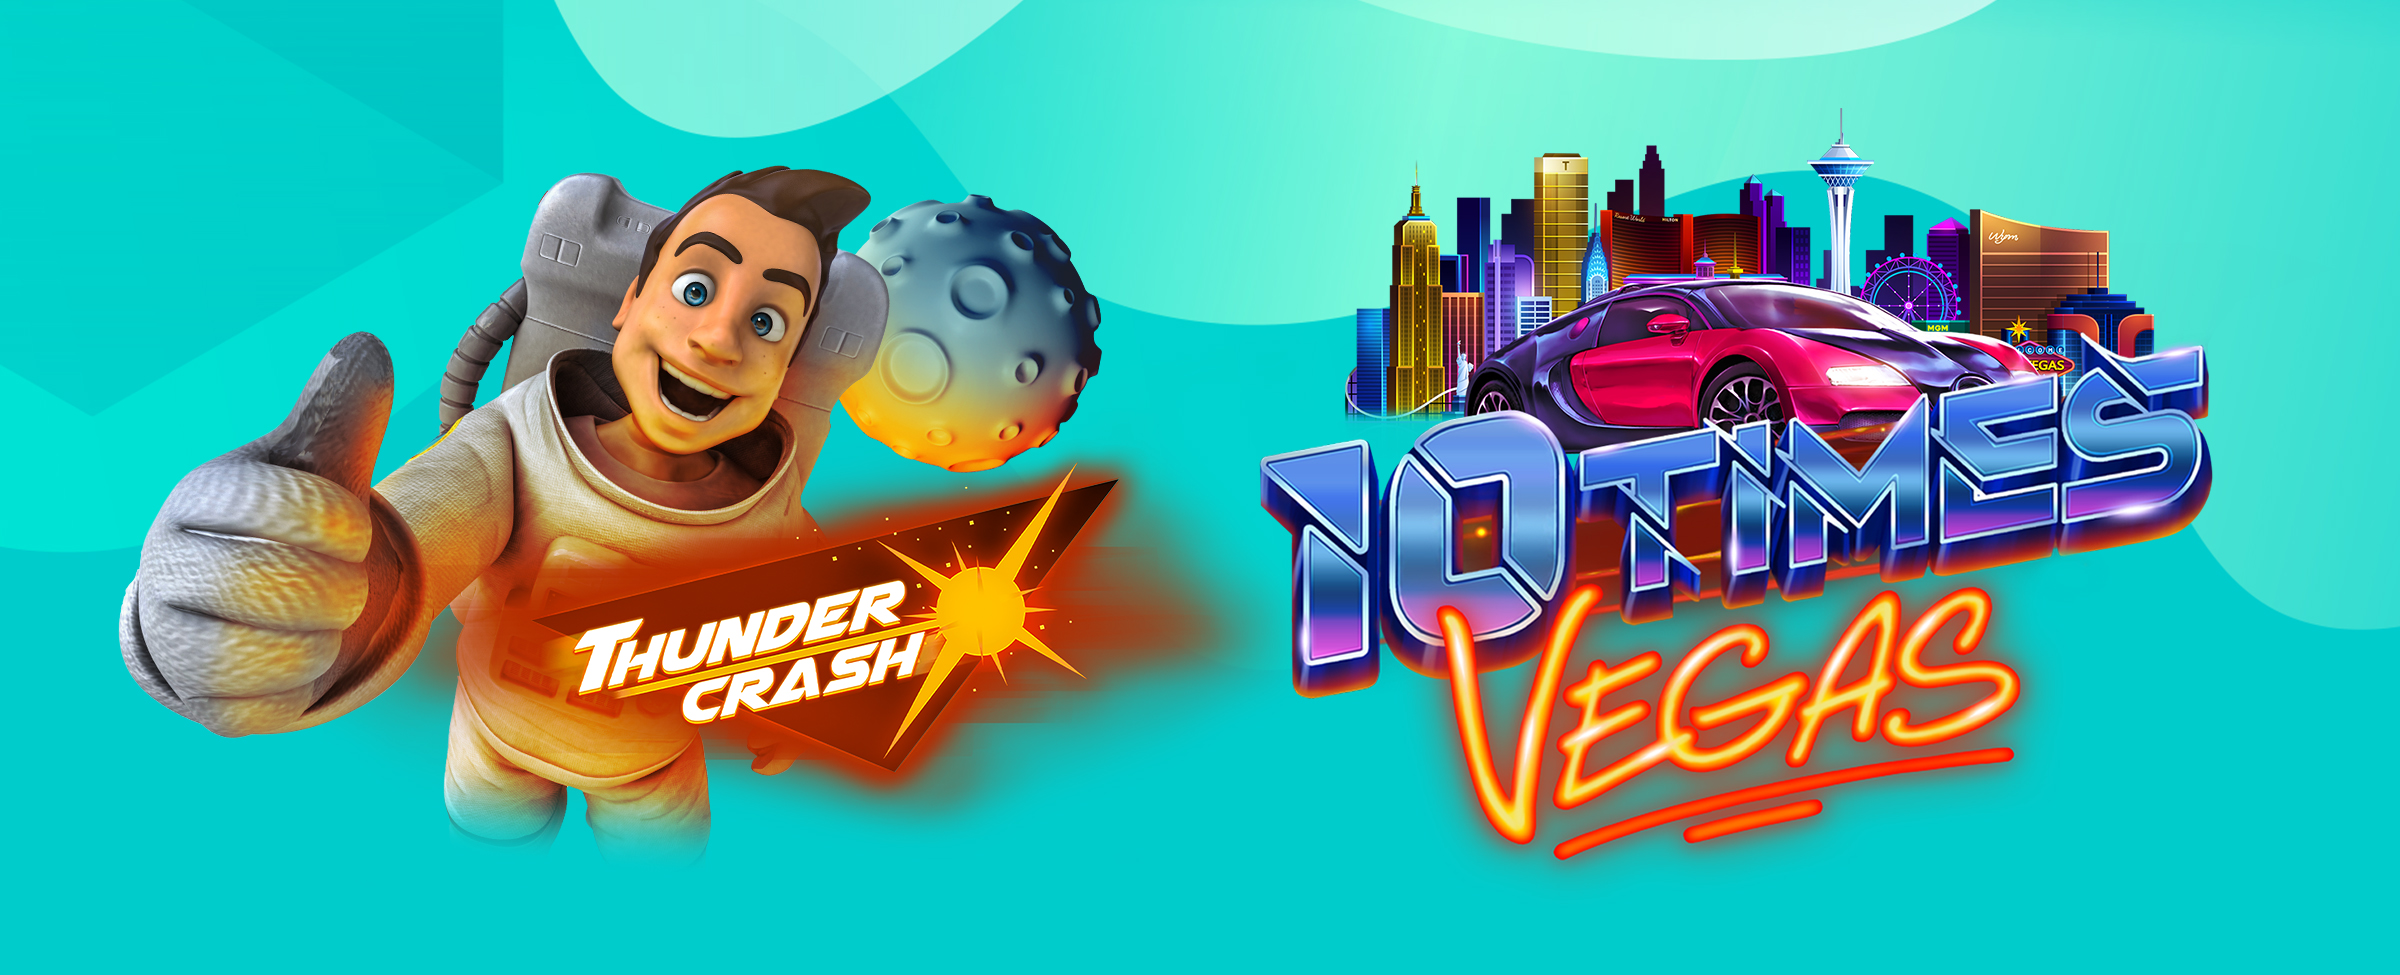 For the home stretch, we bring you Thundercrash and 10 Times Vegas – two of our most popular slot games. Are you ready?